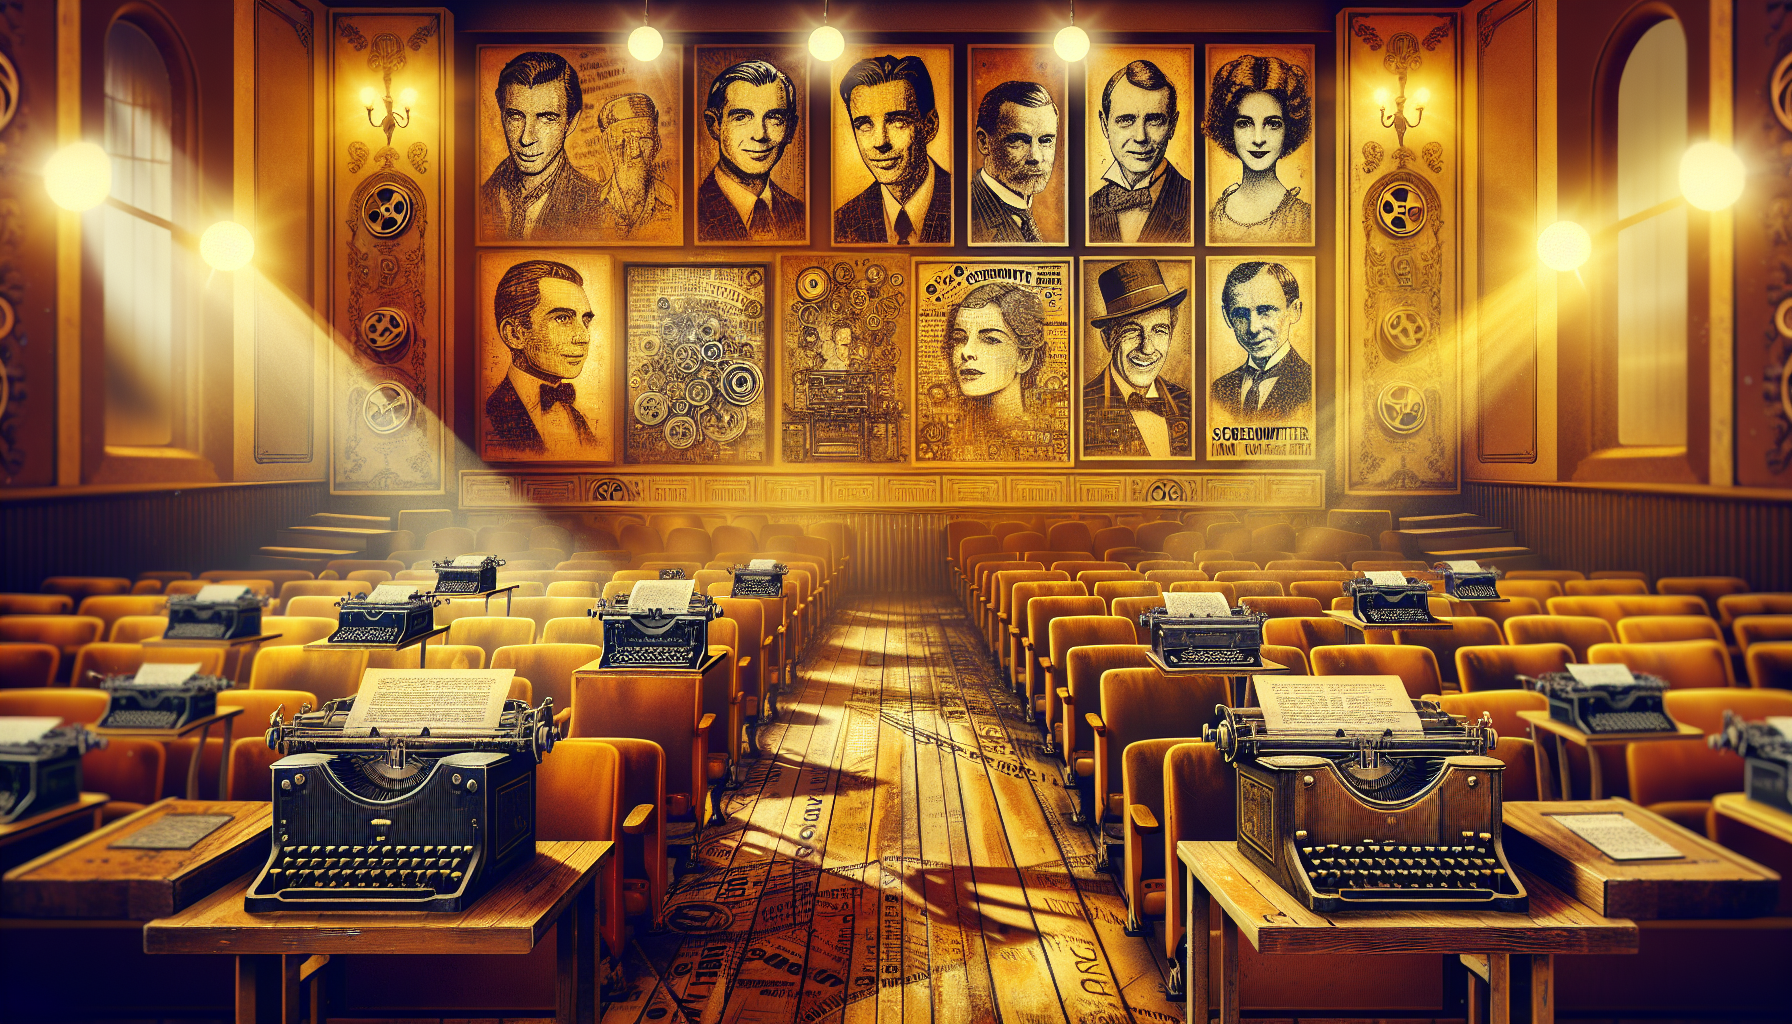 A vintage cinema hall with golden light illuminating posters featuring portraits of top famous screenwriters throughout film history, with antique typewriters and classic film reels scattered around.